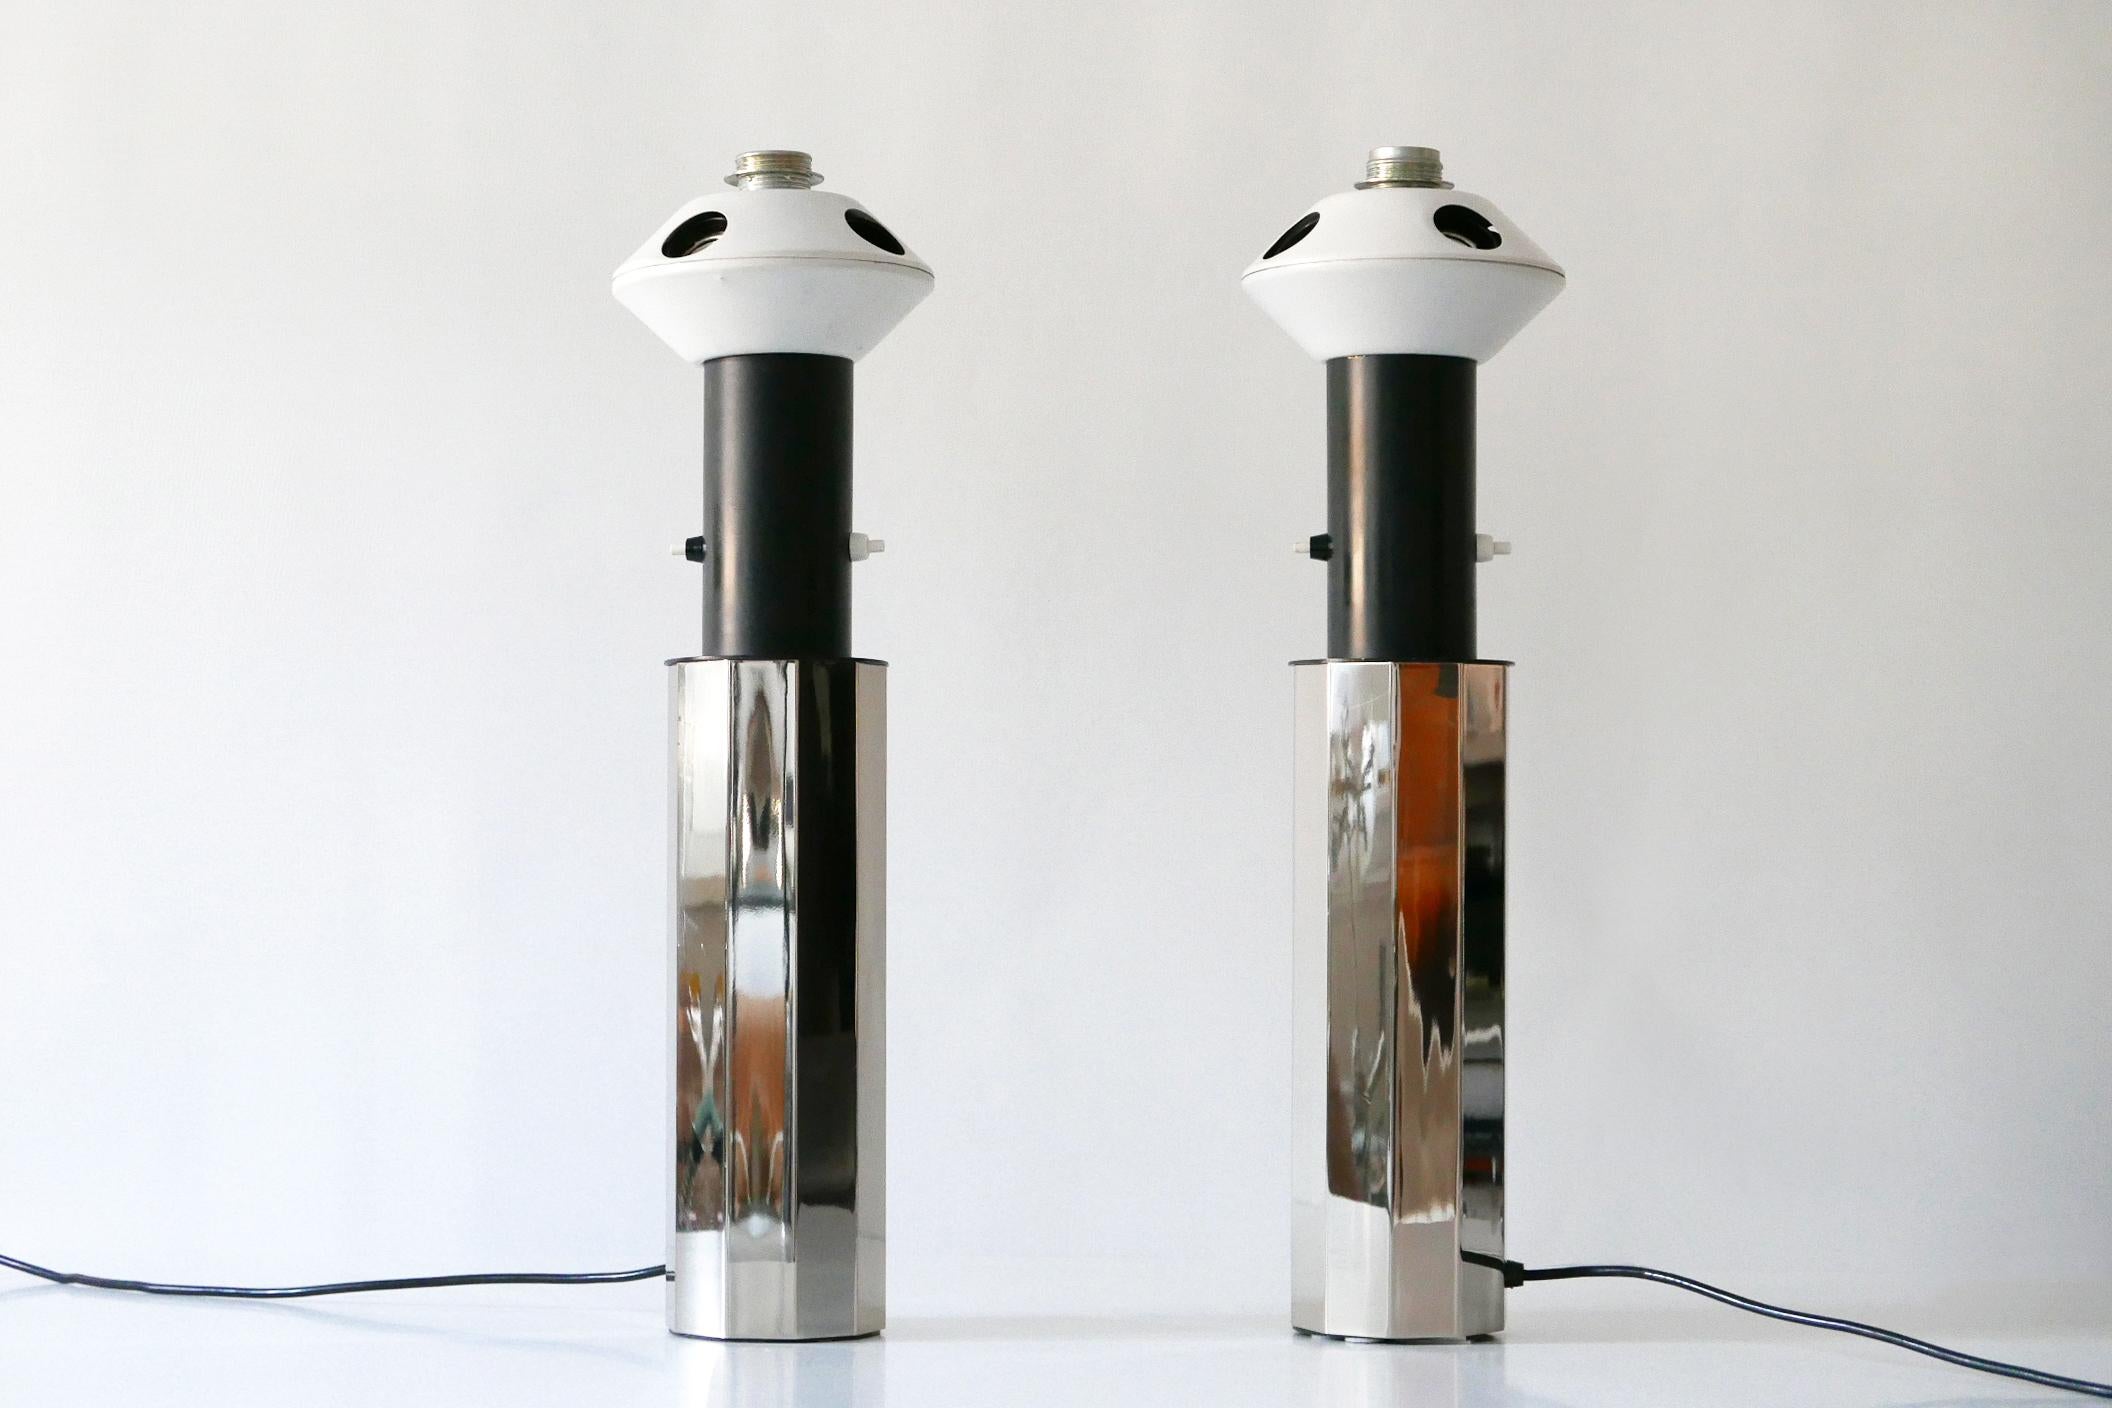 Metal Set of Two Huge, 5-Flamed Midcentury Decagonal Chrome Table Lamps 1960s, Germany For Sale